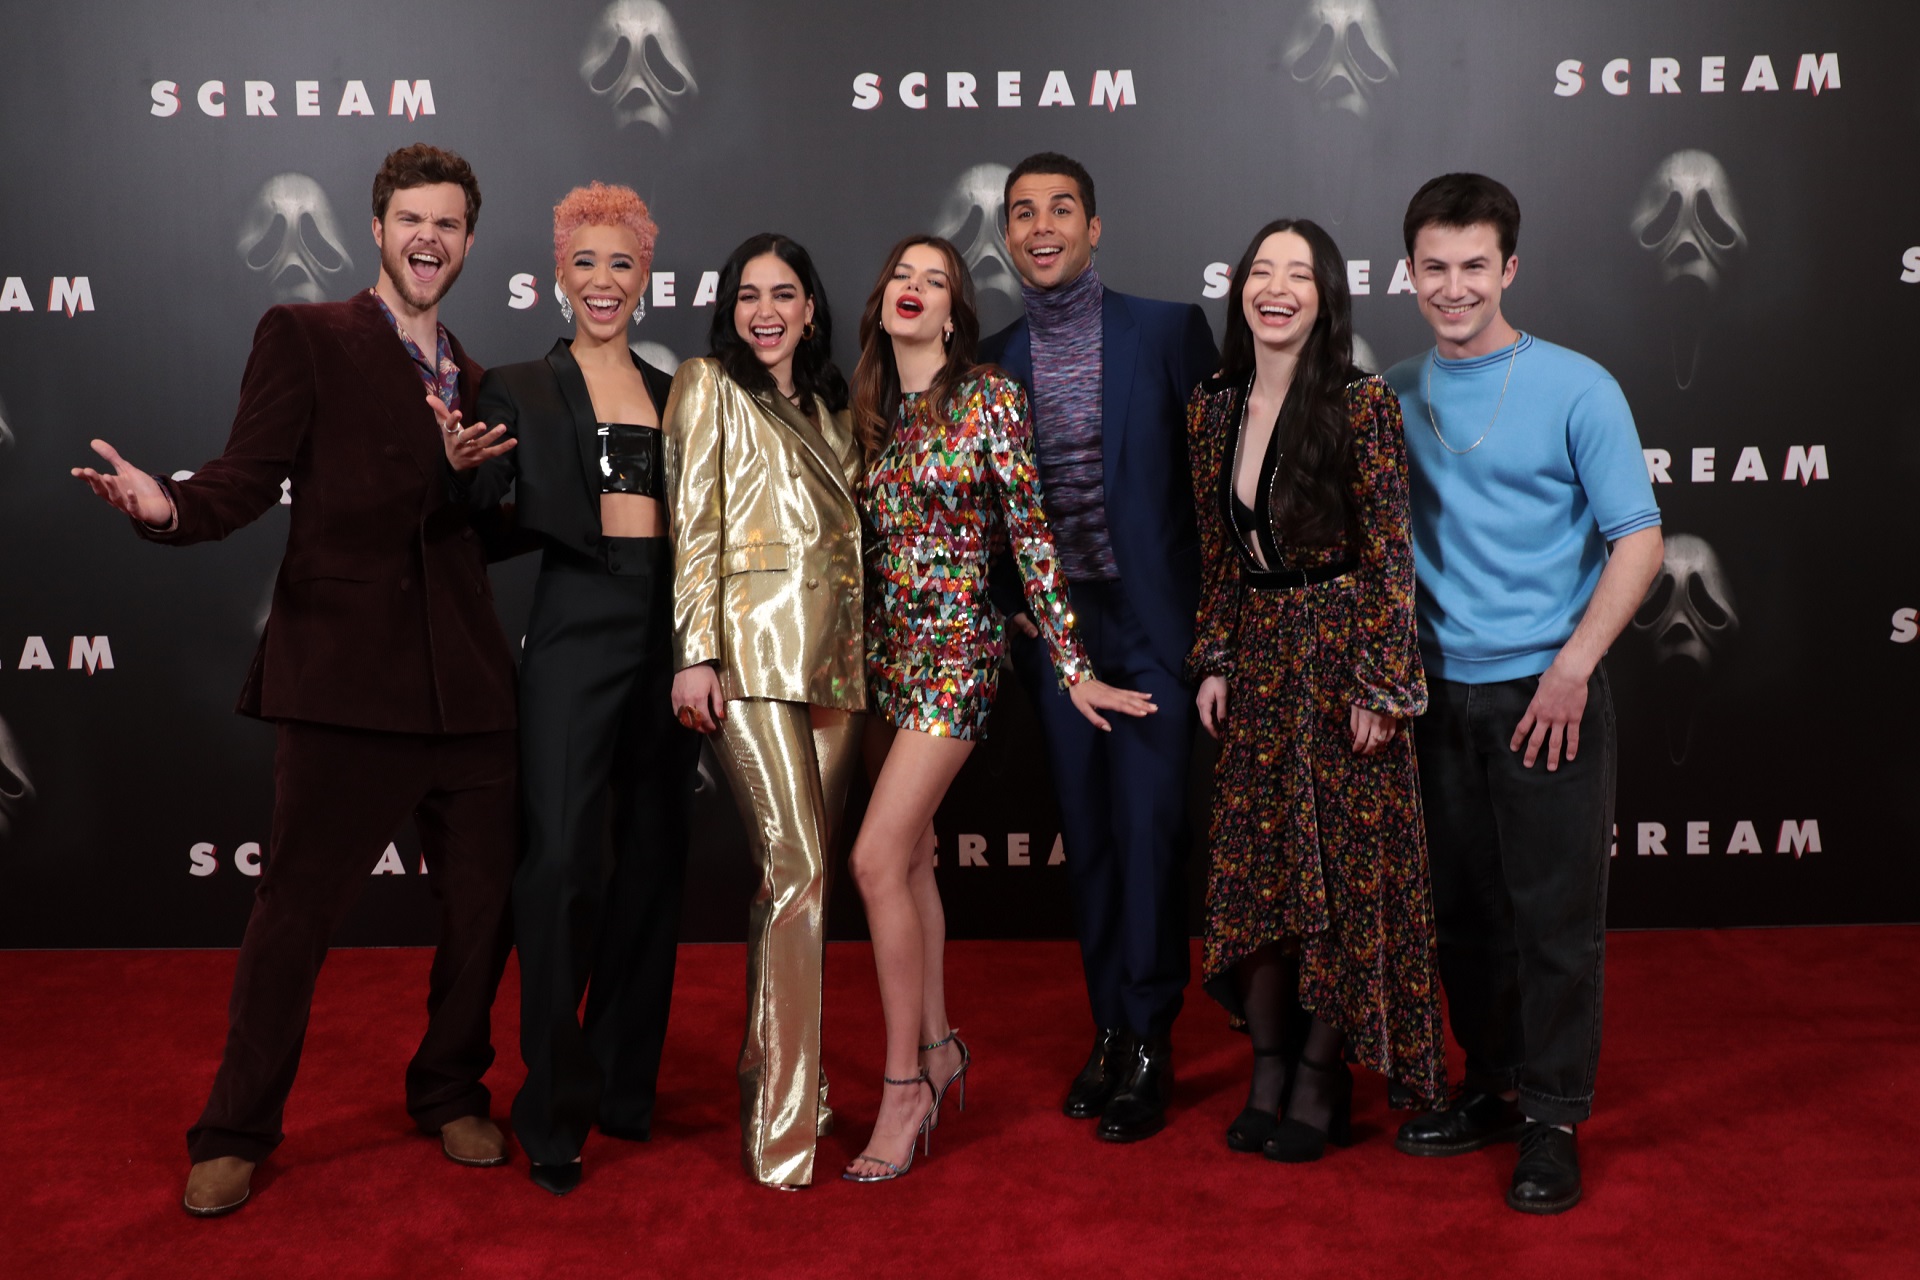 Interview The cast of Scream on carrying on the iconic horror